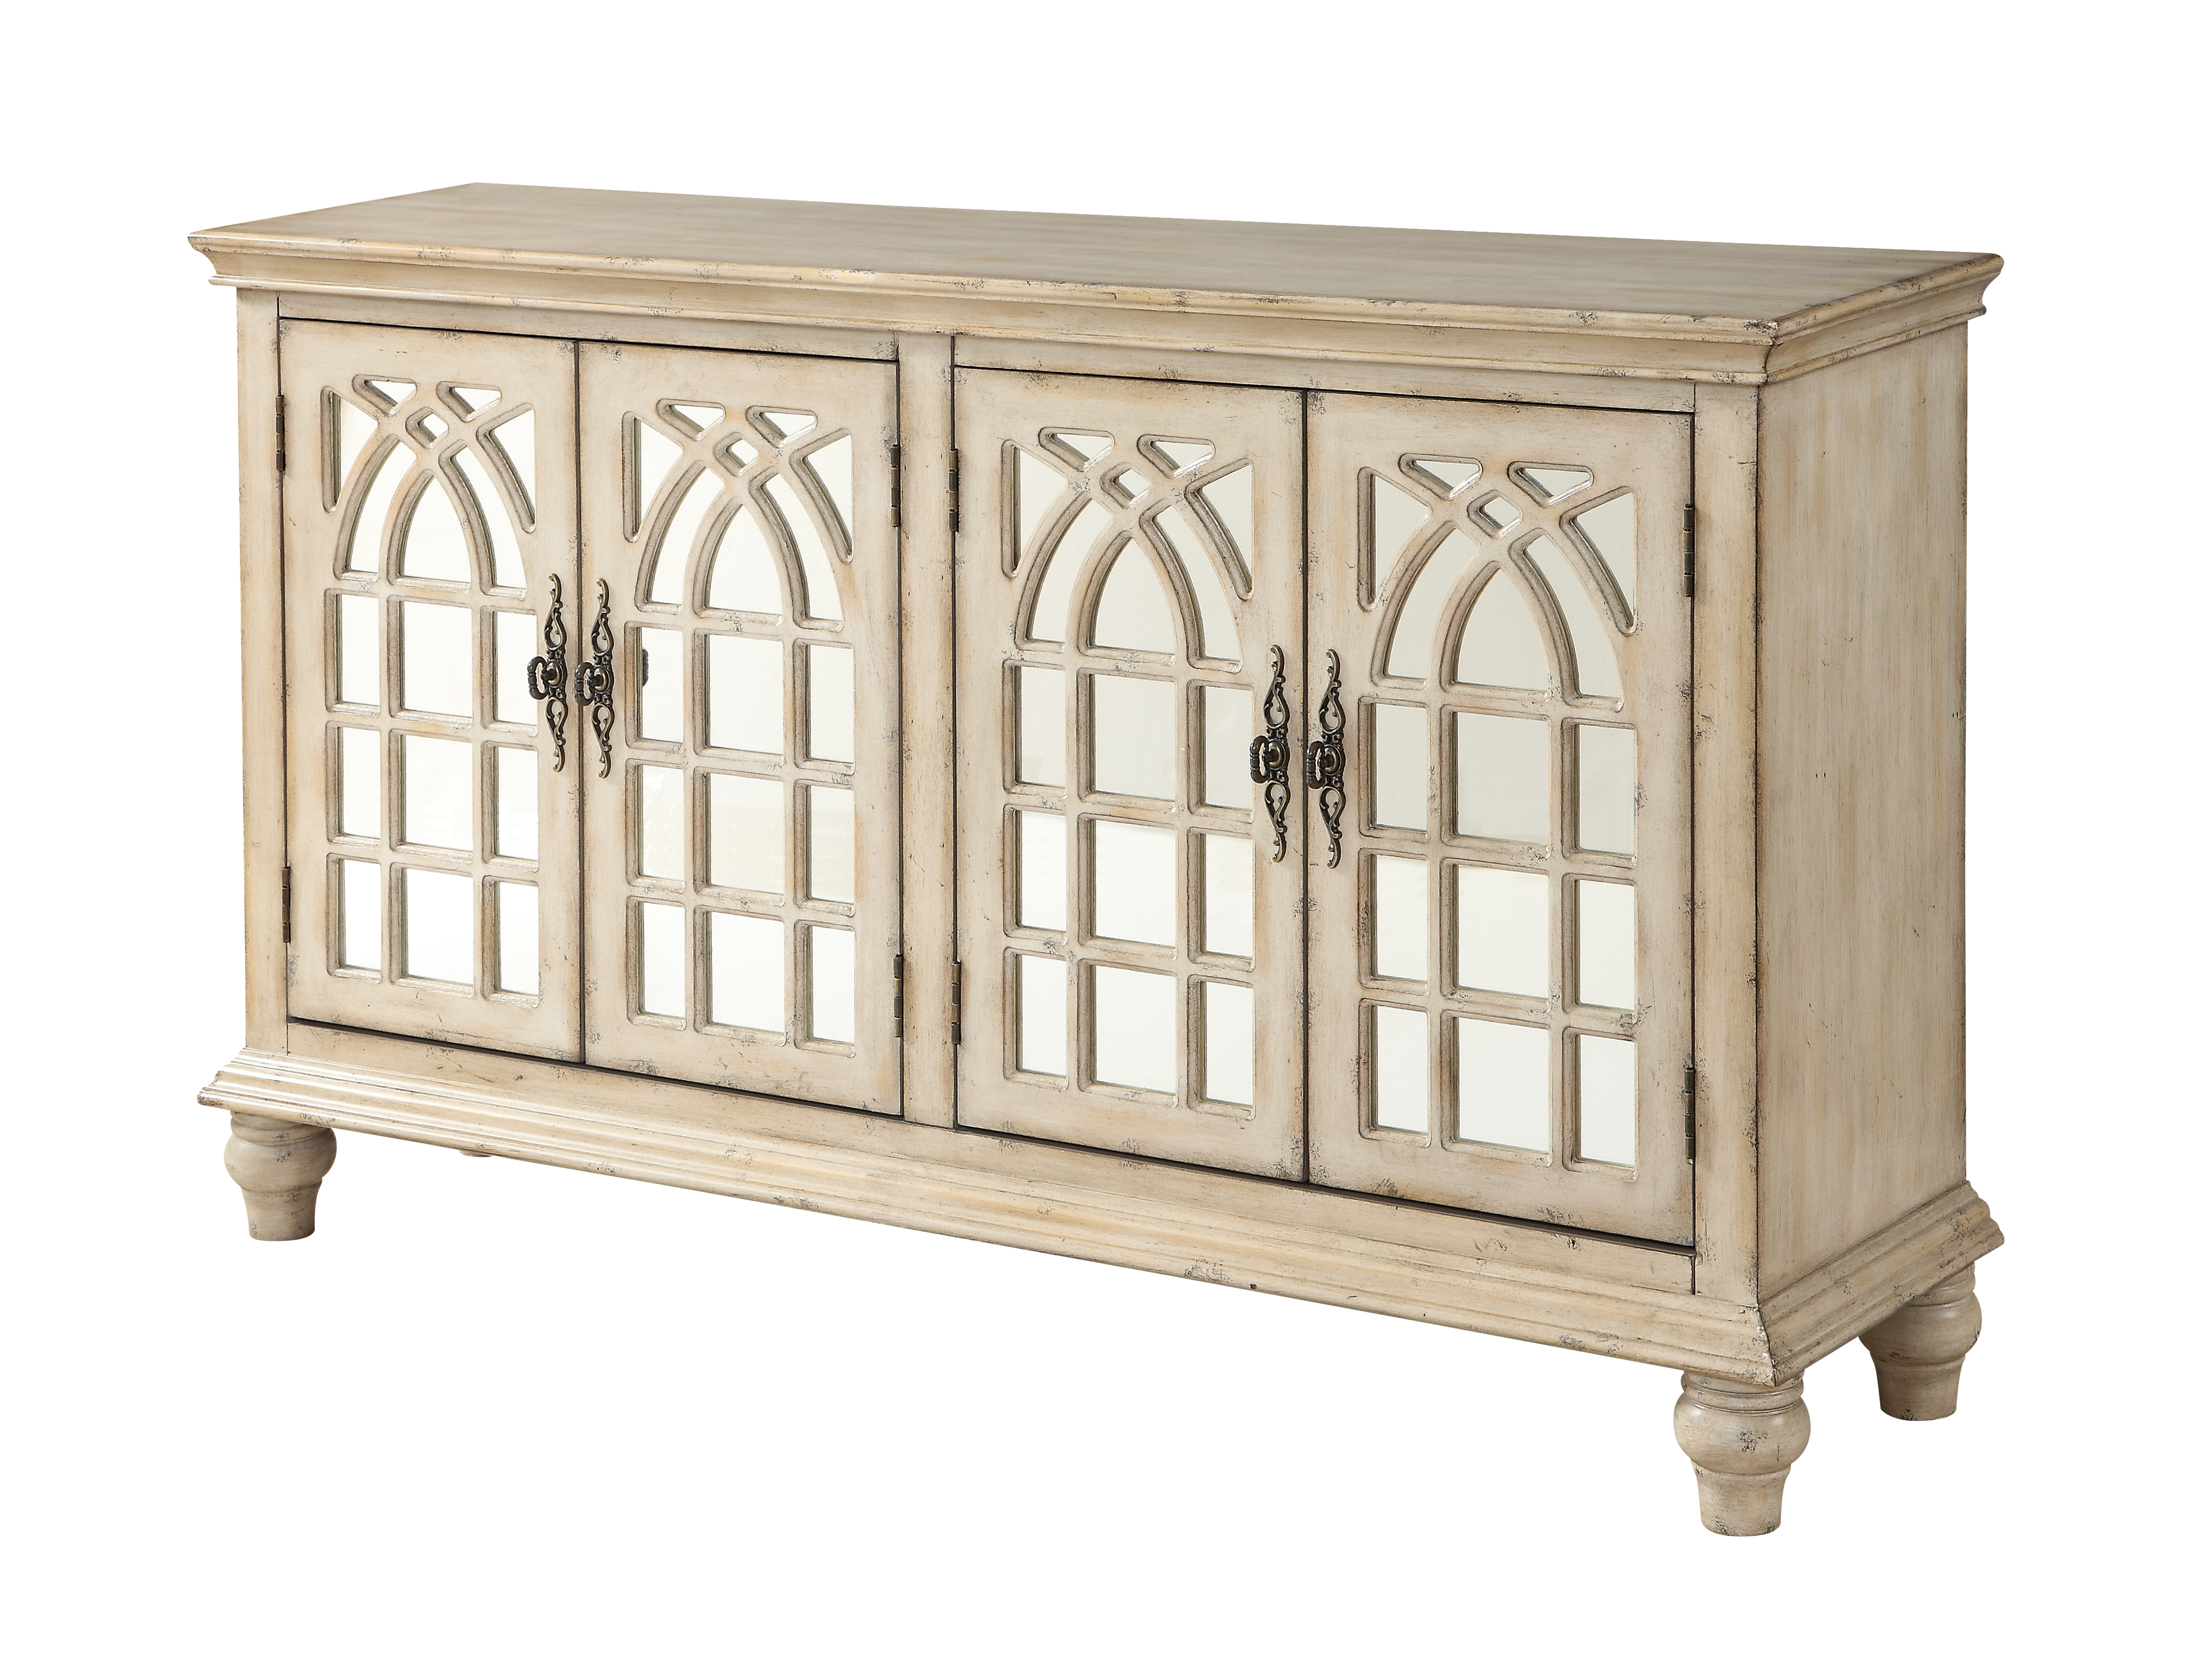 Four Door Credenza, French Cream - Sycamore Home